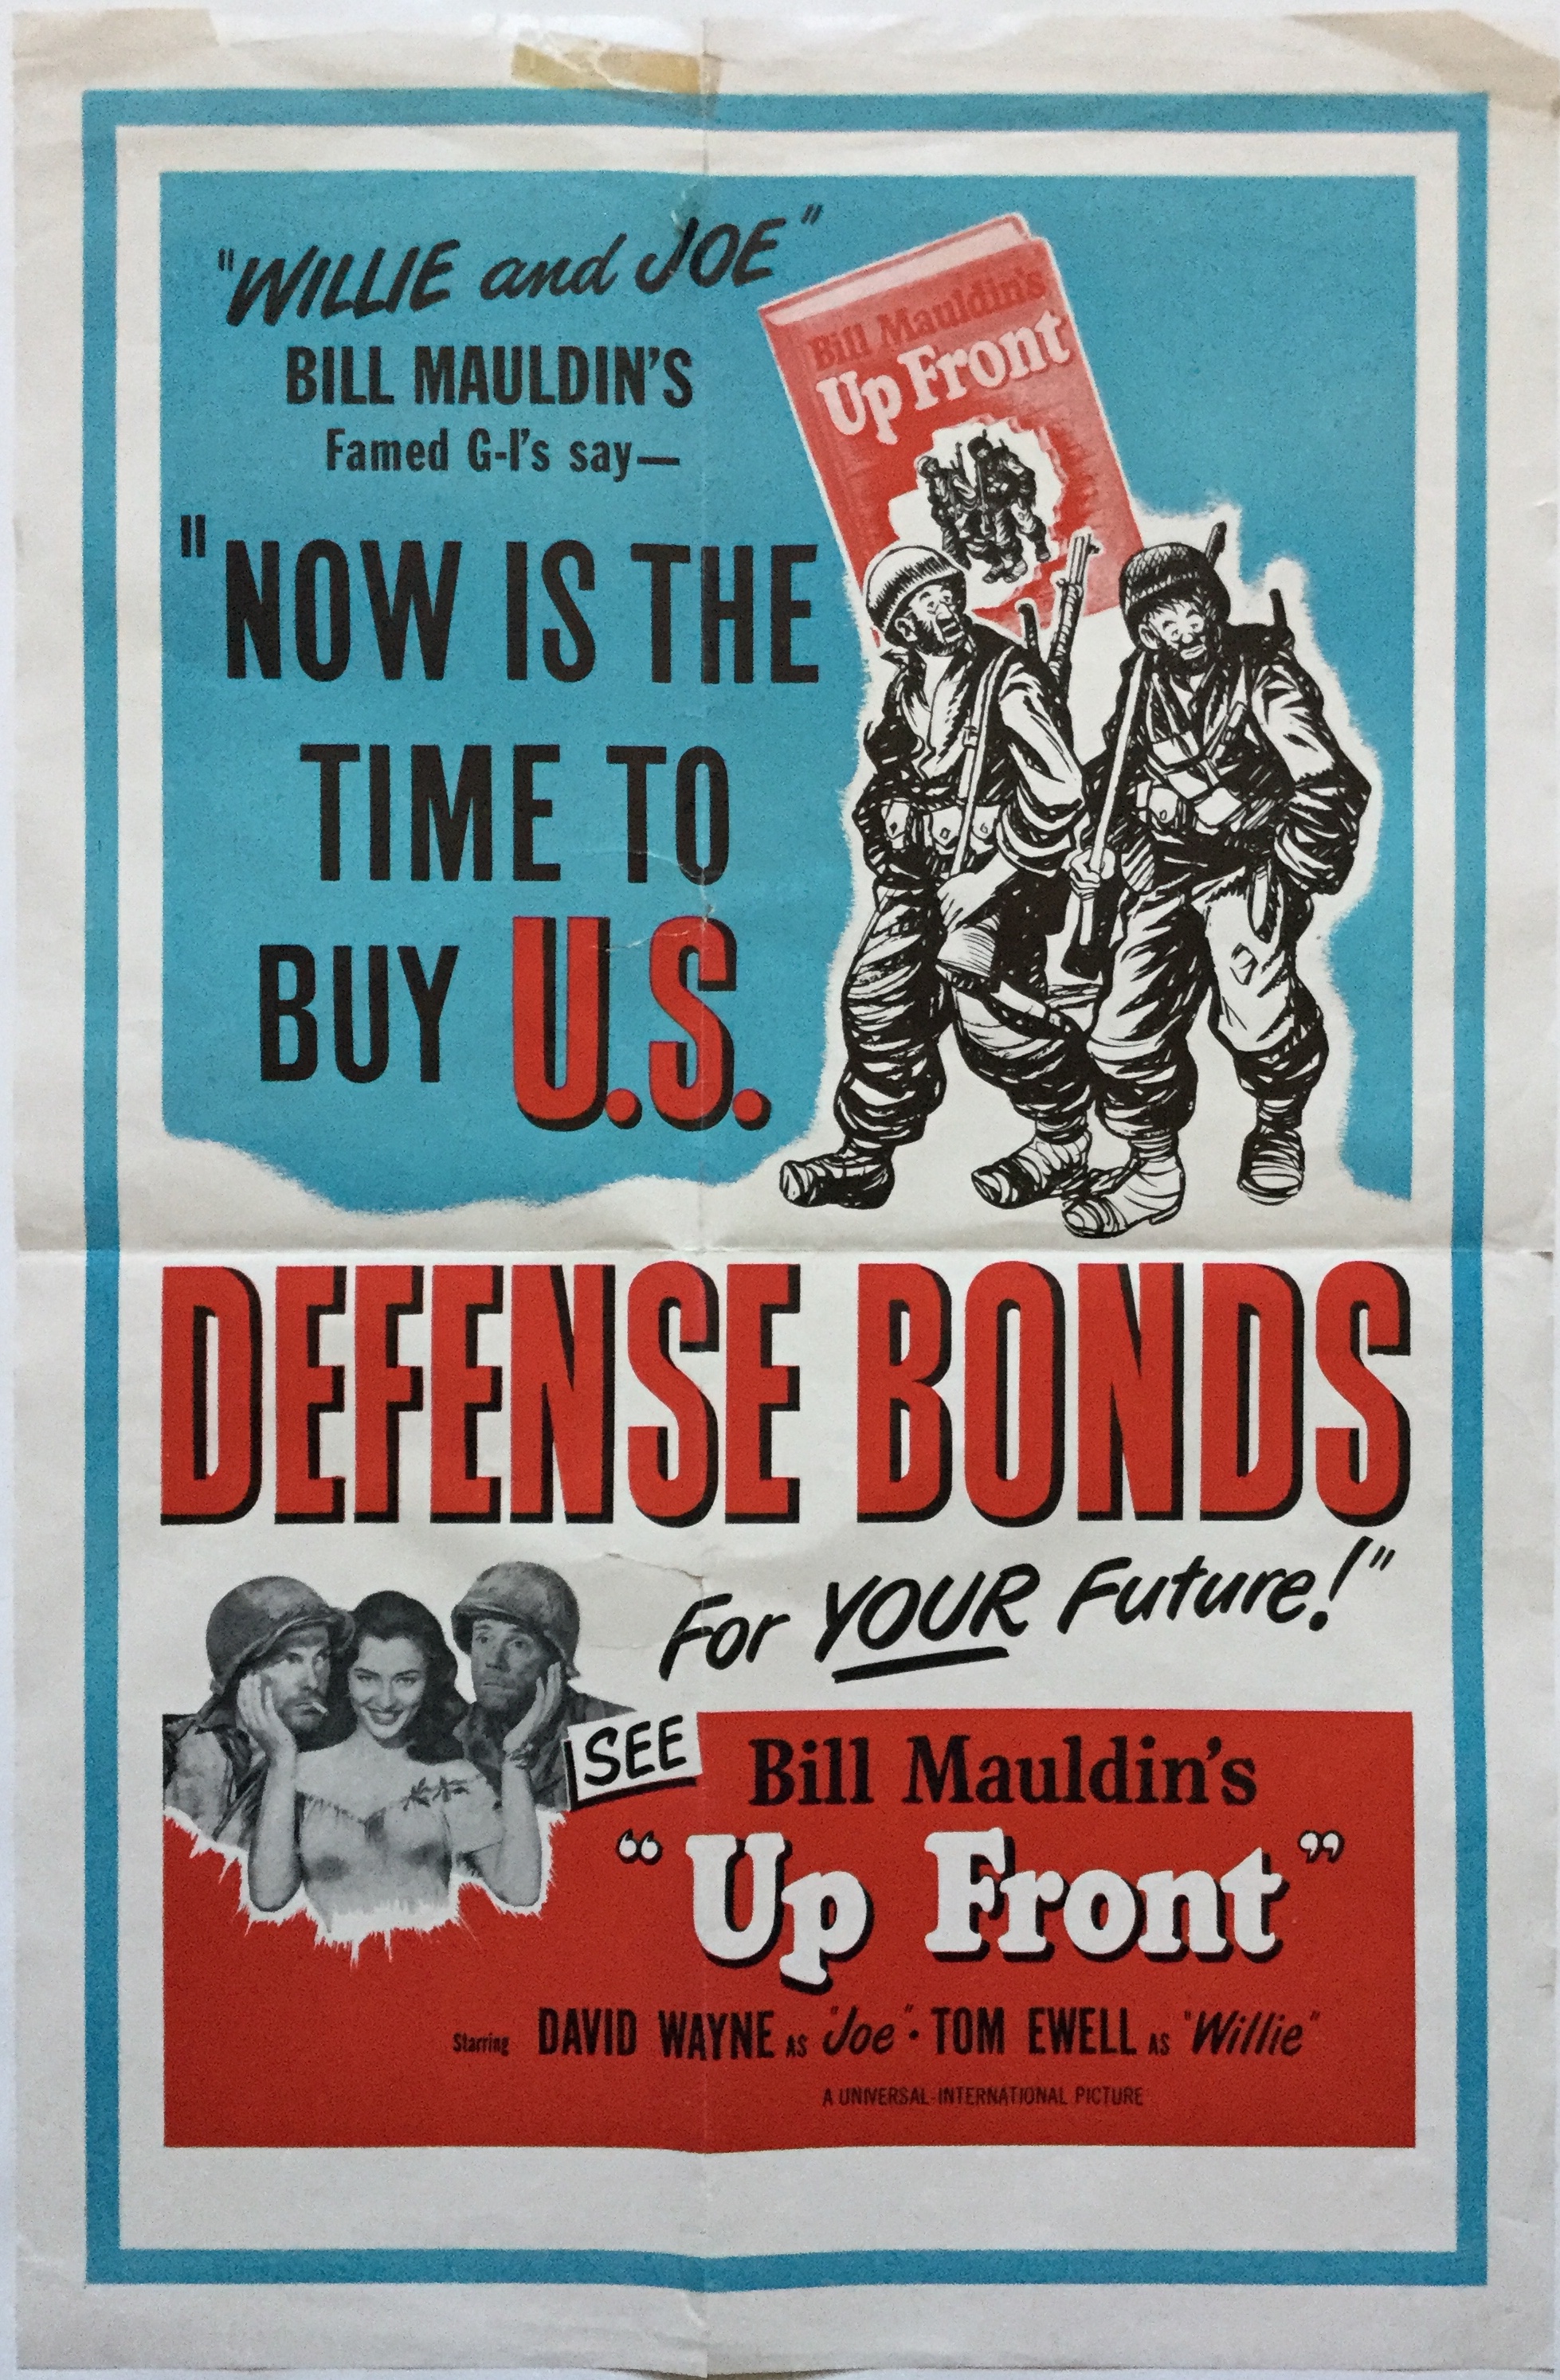 J359	 NOW IS THE TIME TO BUY U.S. DEFENSE BONDS FOR YOUR FUTURE! SEE BILL MAULDIN’S “UP FRONT”